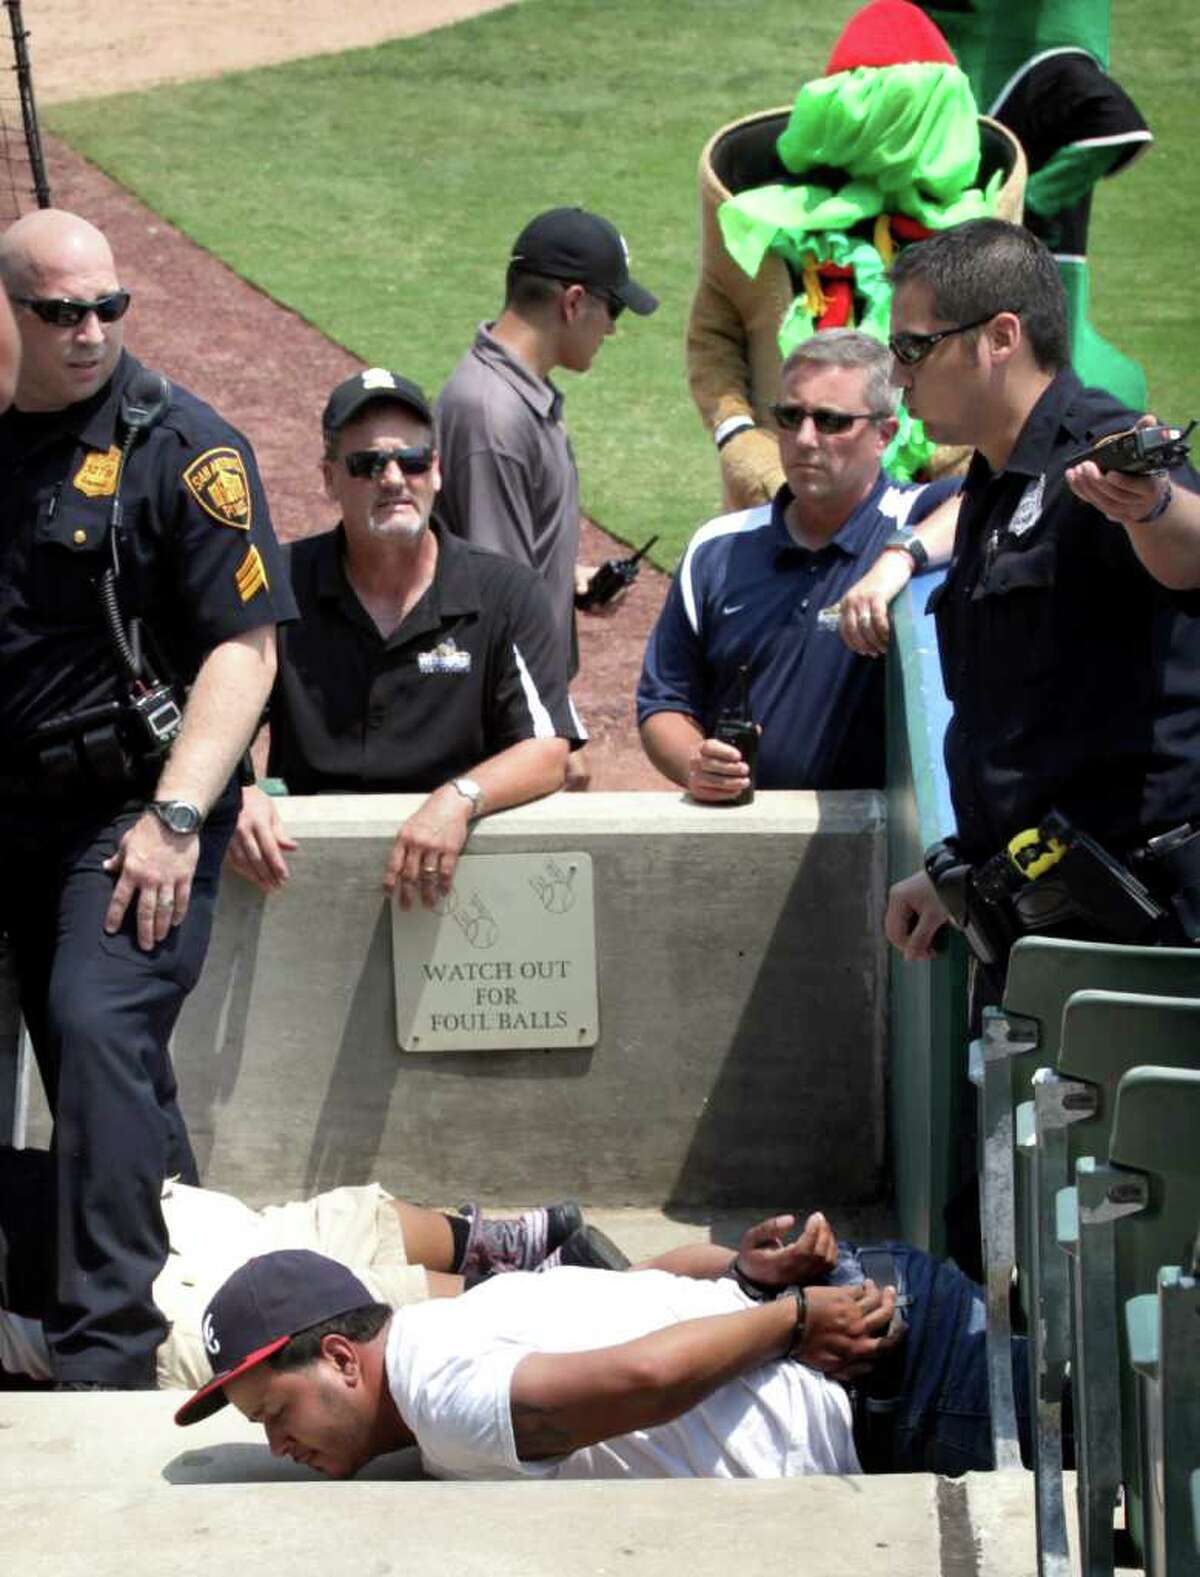 Sports daily - San Antonio police officers detain two San Antonio Missions fans after a altercation between them and members of the Frisco RoughRiders at Wolff Stadium, Tuesday, April 26, 2011. RoughRiders team members threw a bat and a trash can at the fans at the end of the game after the umpire called back a homerun call by the RoughRiders. Photo Bob Owen/rowen@express-news.net